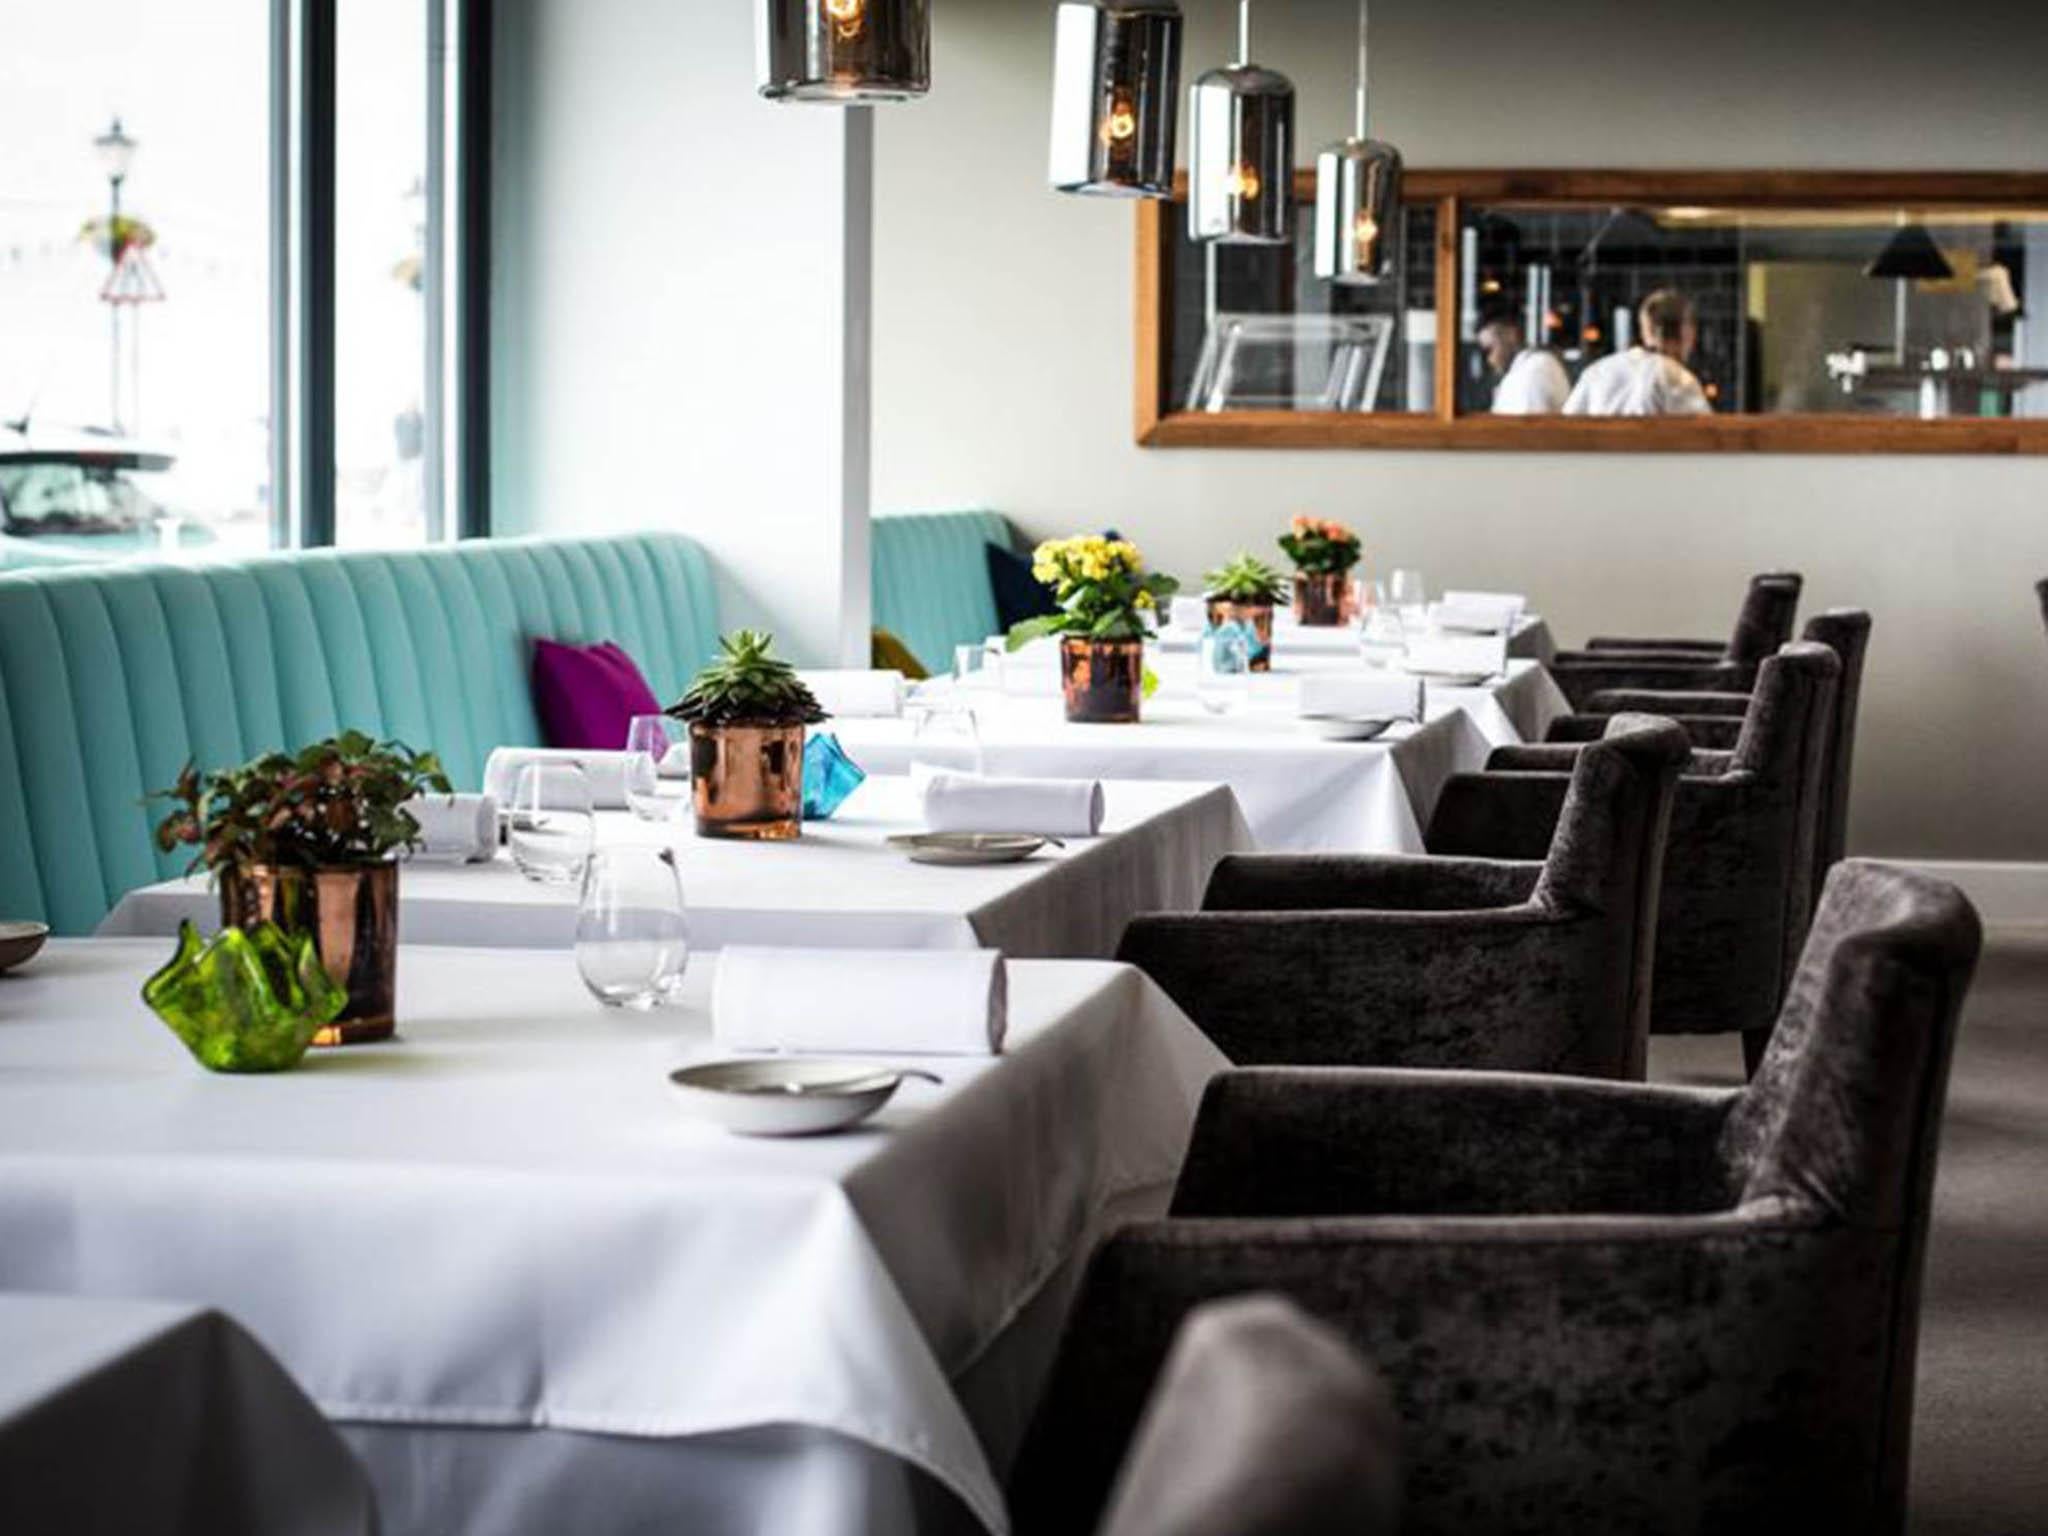 At James Sommerin, every table is served a slightly different version of the tasting menu